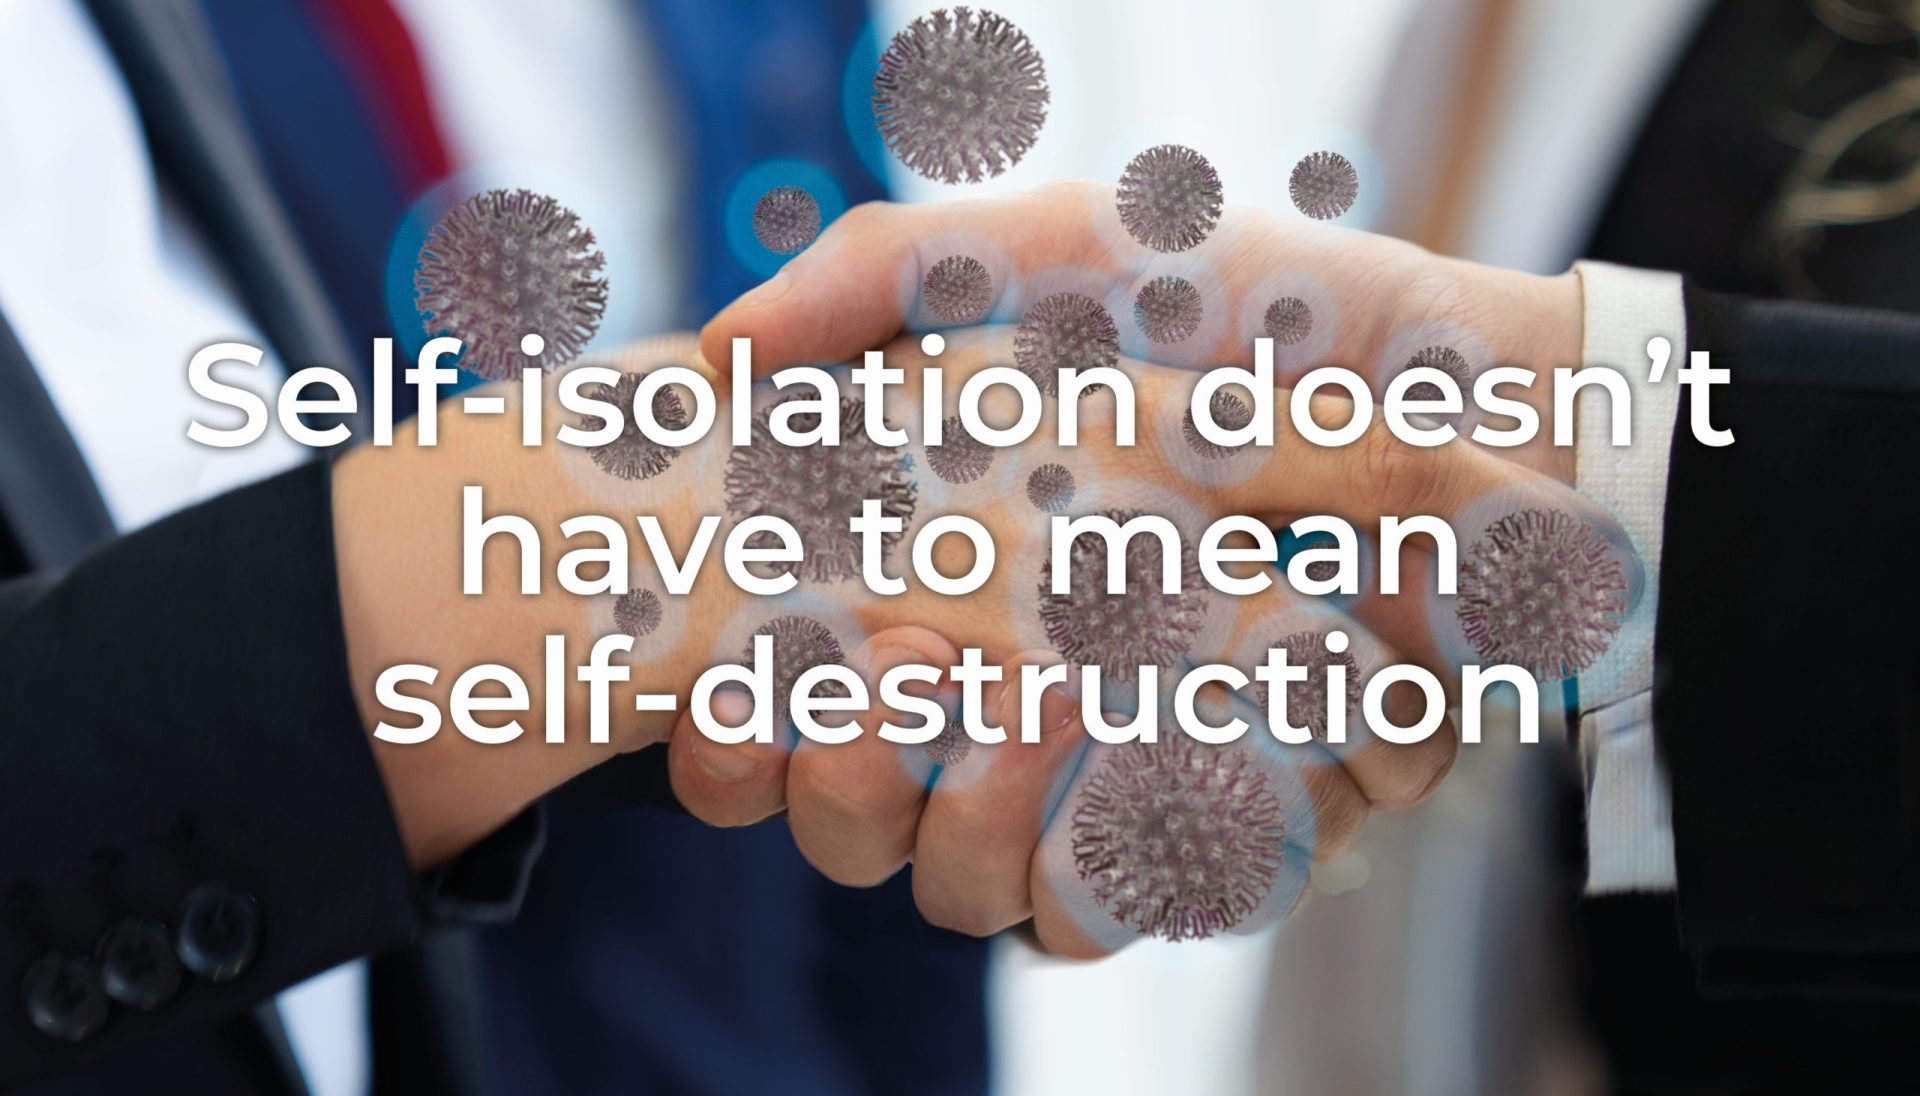 Self-isolation doesn’t have to mean self-destruction